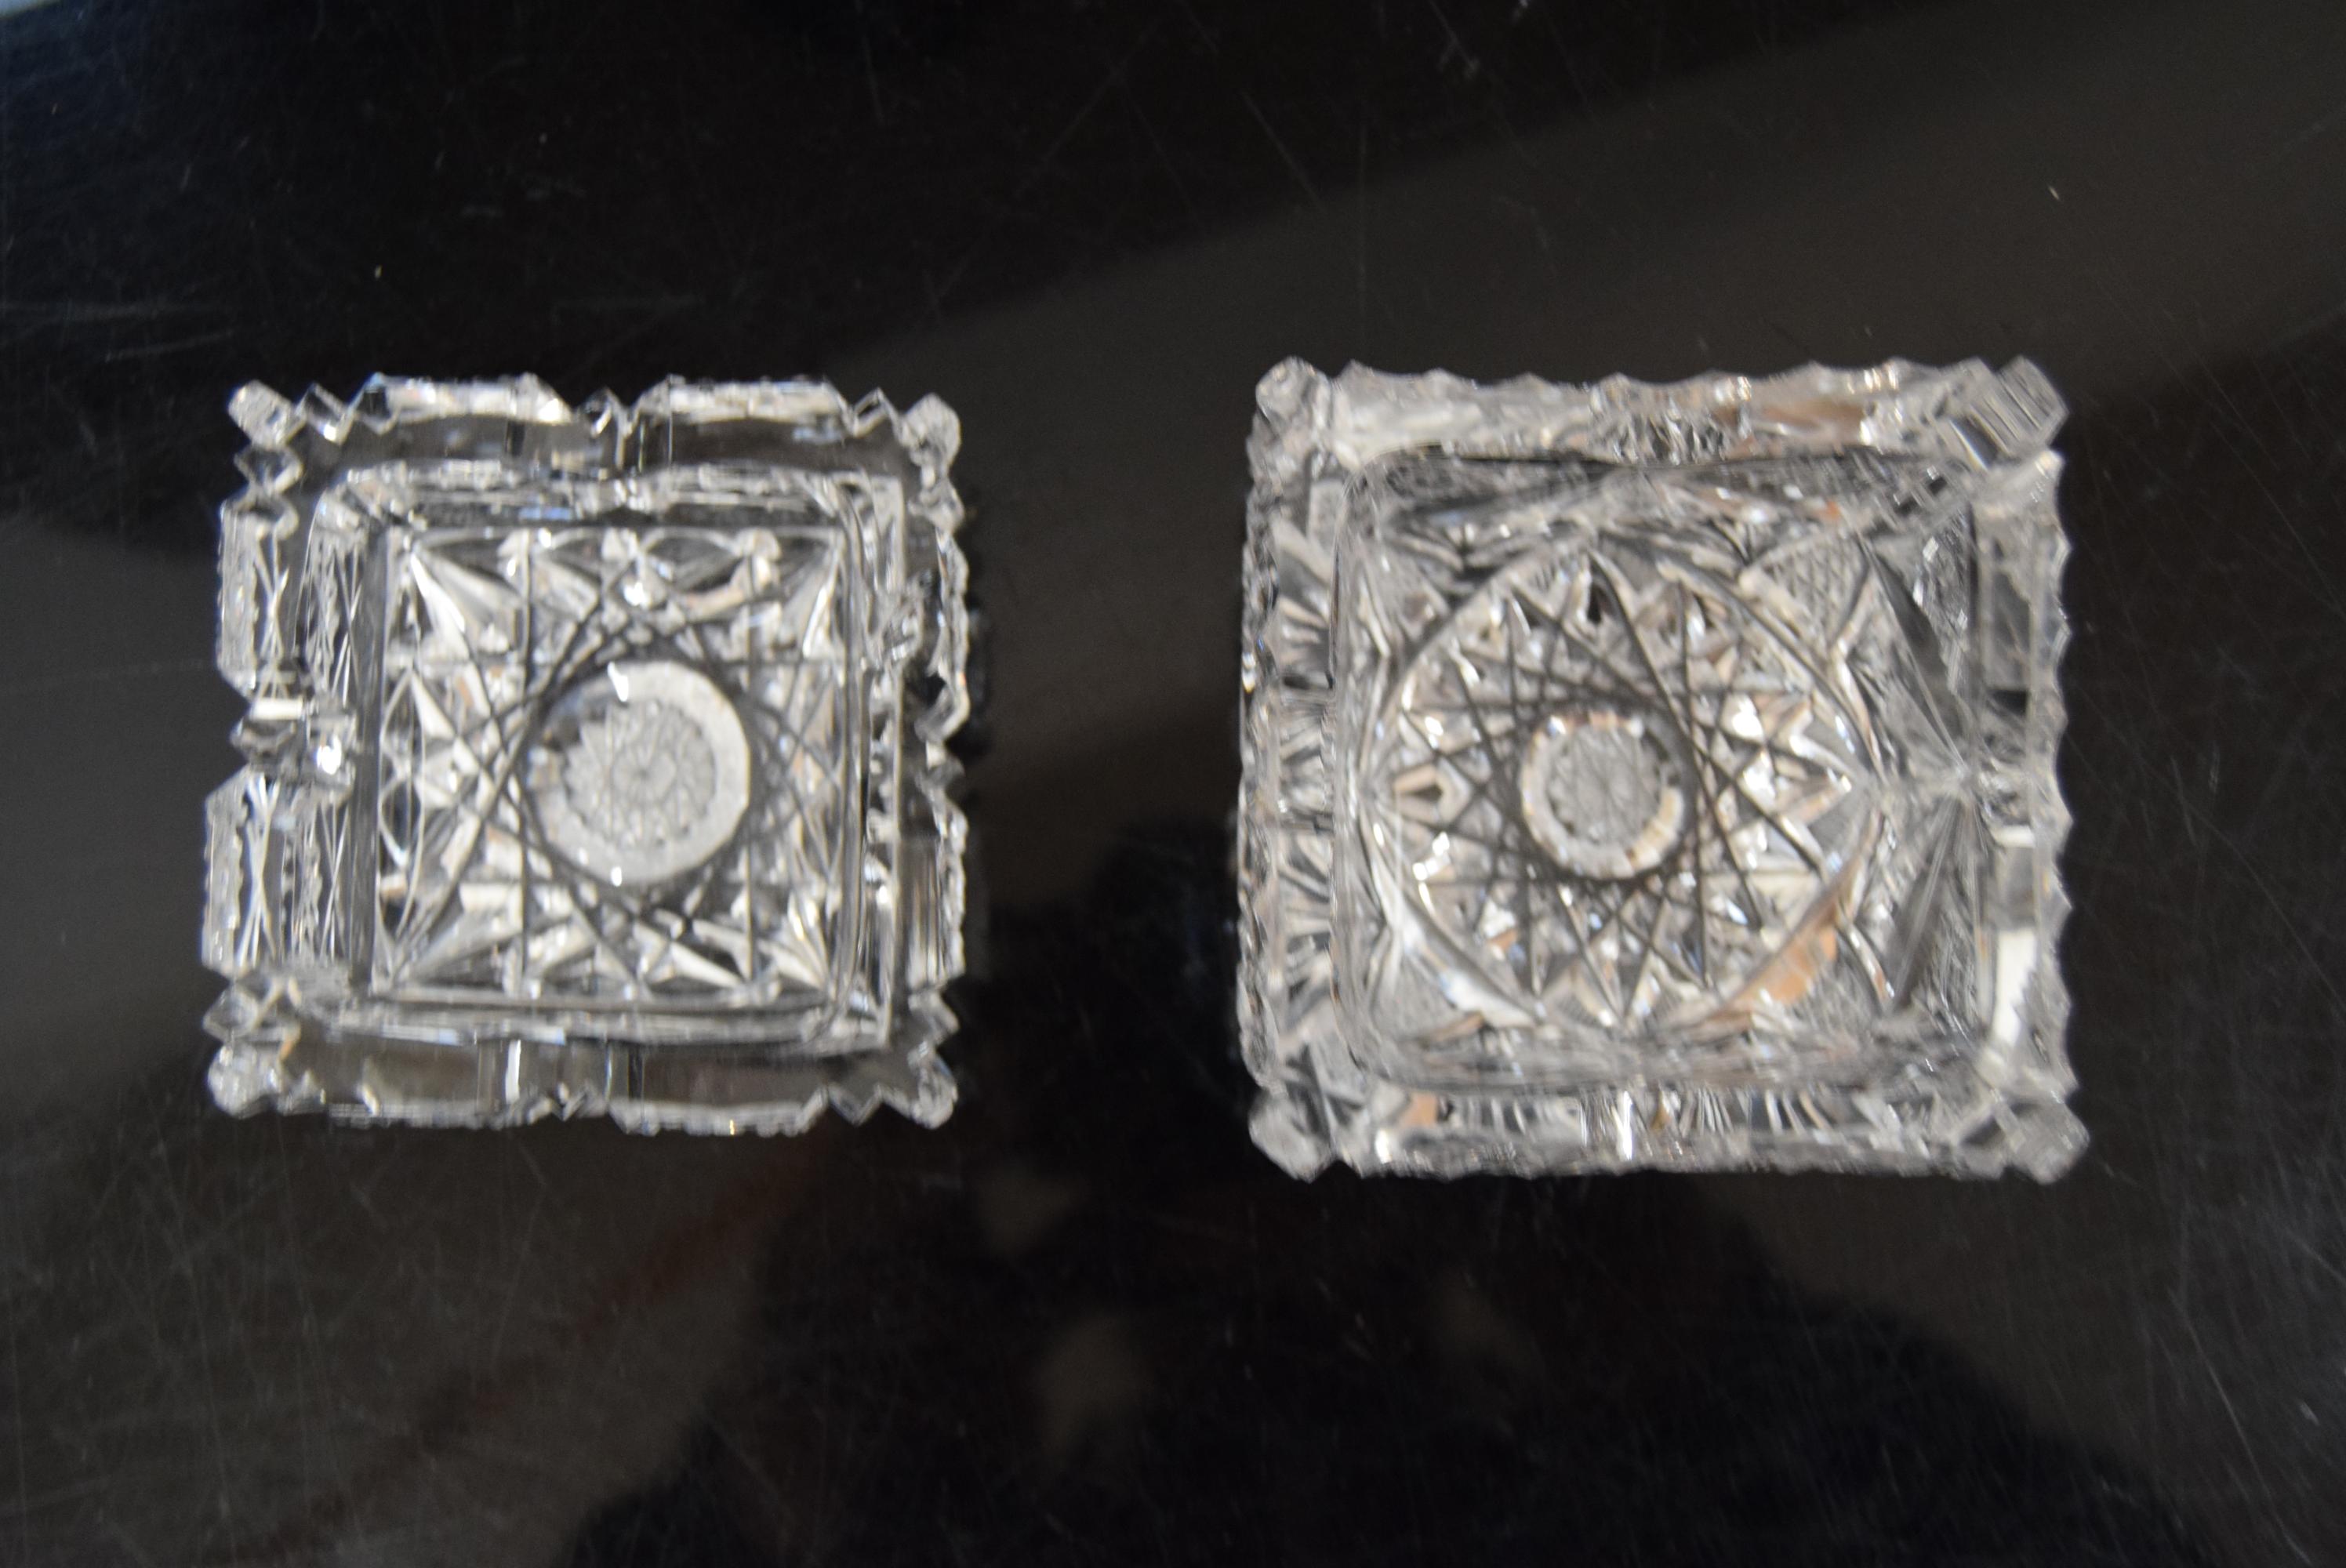 Czech Pair of Rare Vintage Ashtrays, Cut Crystal Glass, Bohemia in the, 1960s For Sale